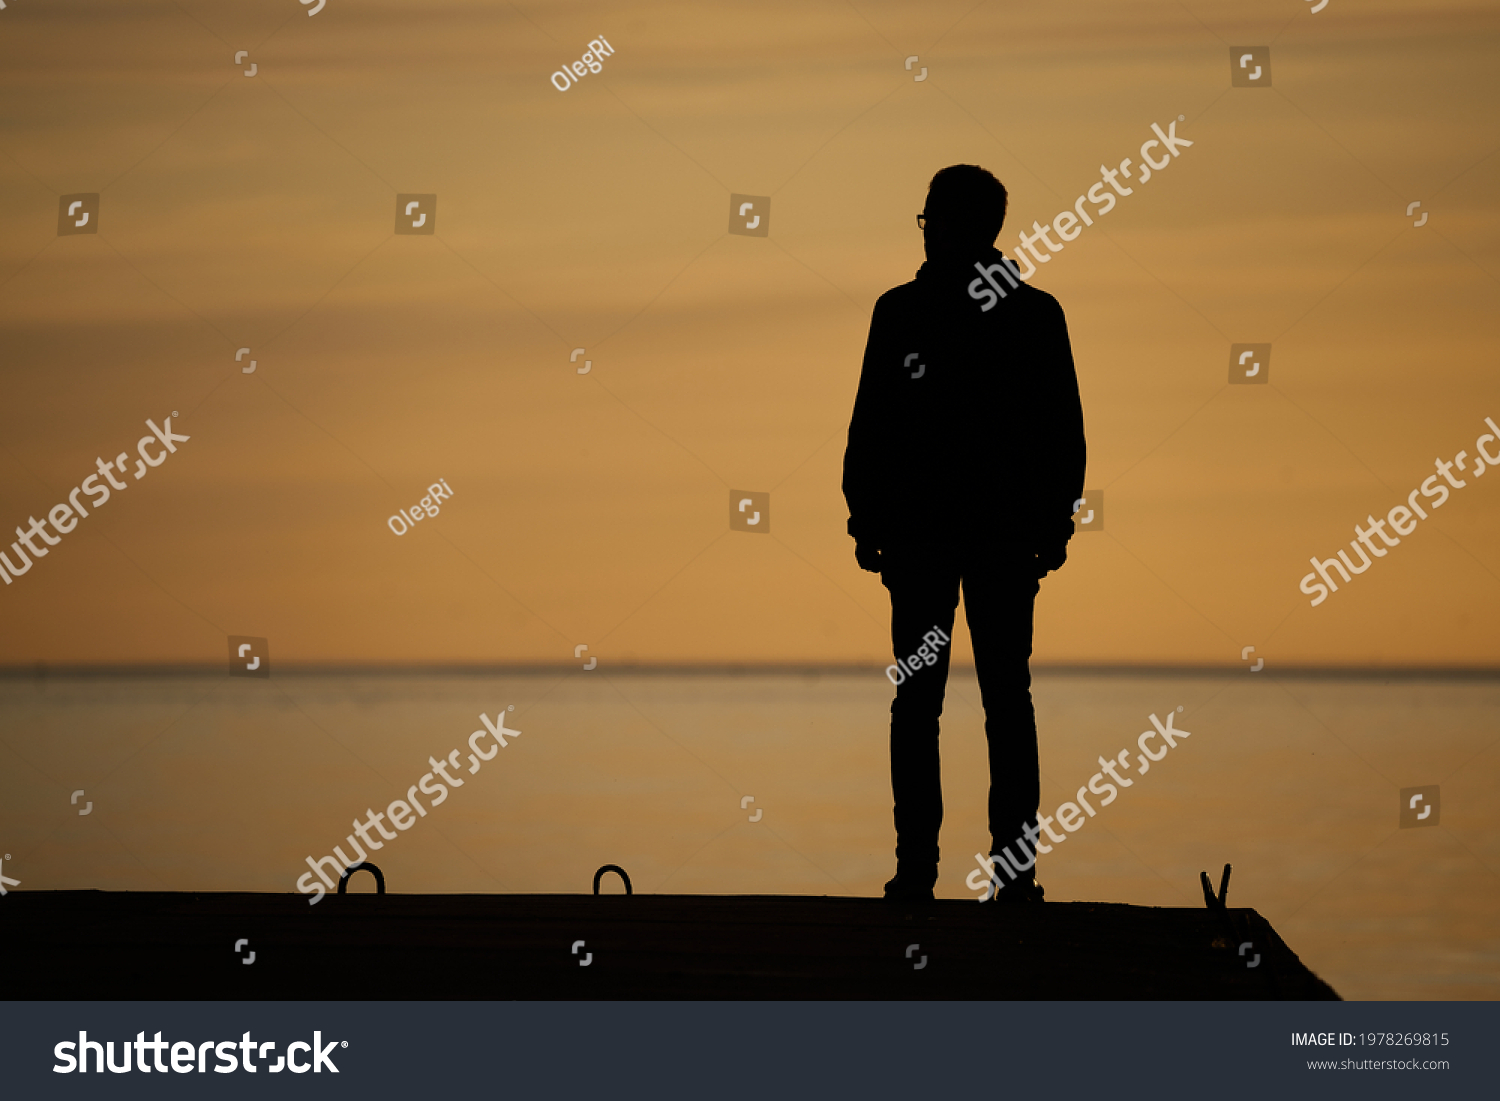 man standing on rock looking straight. Nature and beauty concept. Orange sundown. silhouette at sunset #1978269815